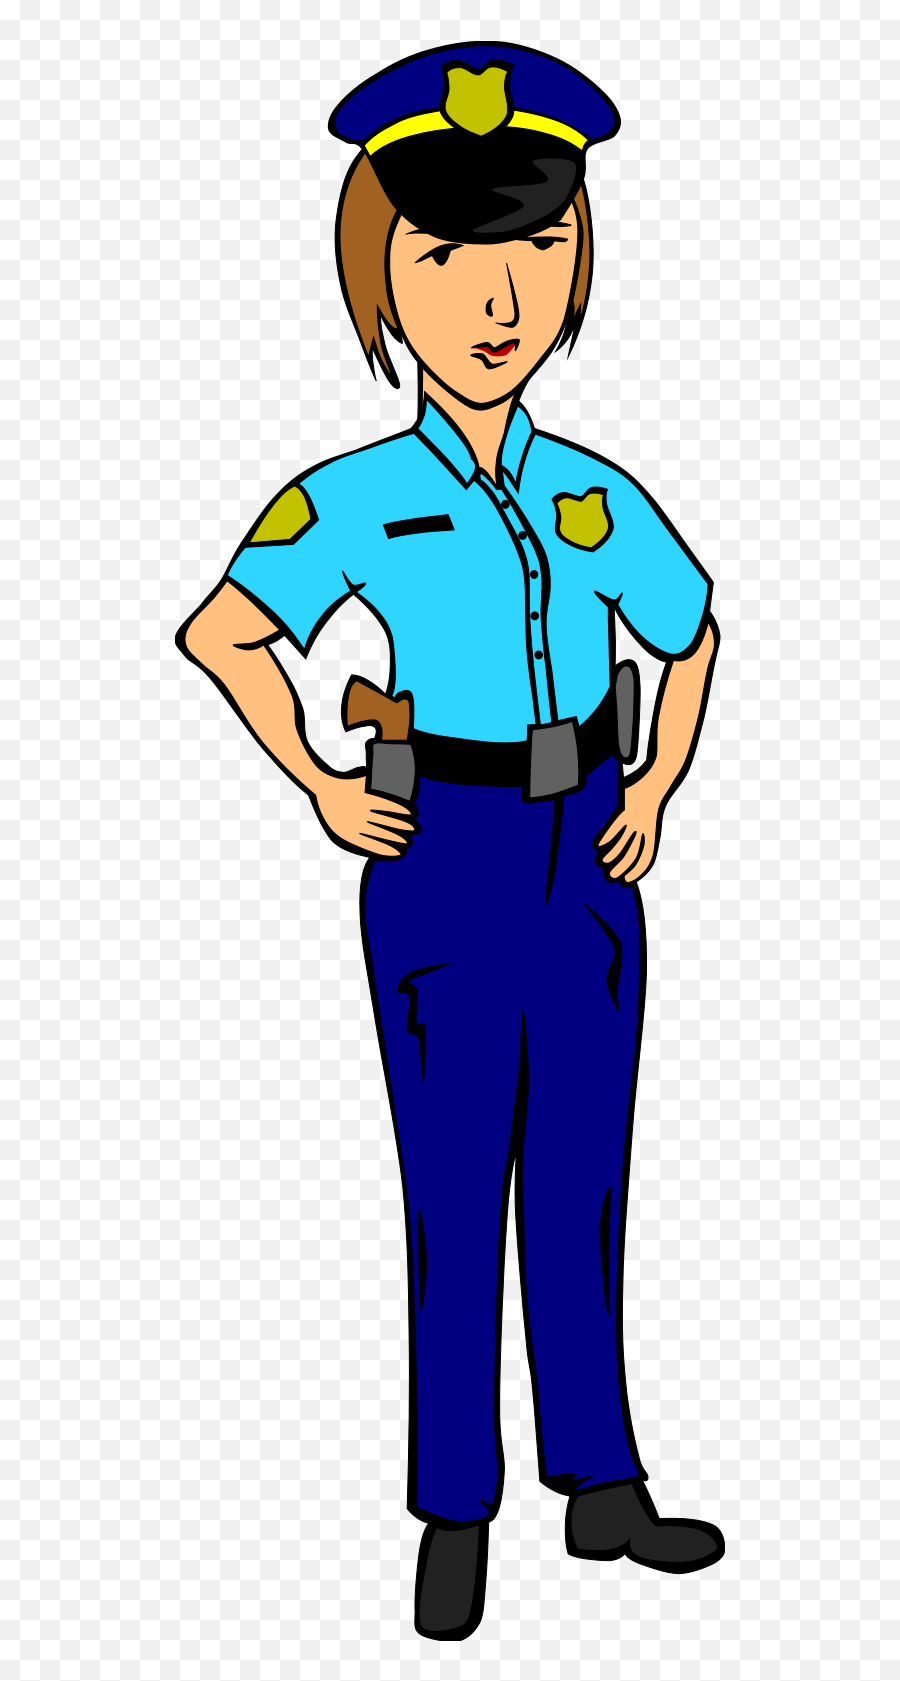 Police Clipart - 59 Cliparts Police Officer Clipart Emoji,Police Badge Clipart